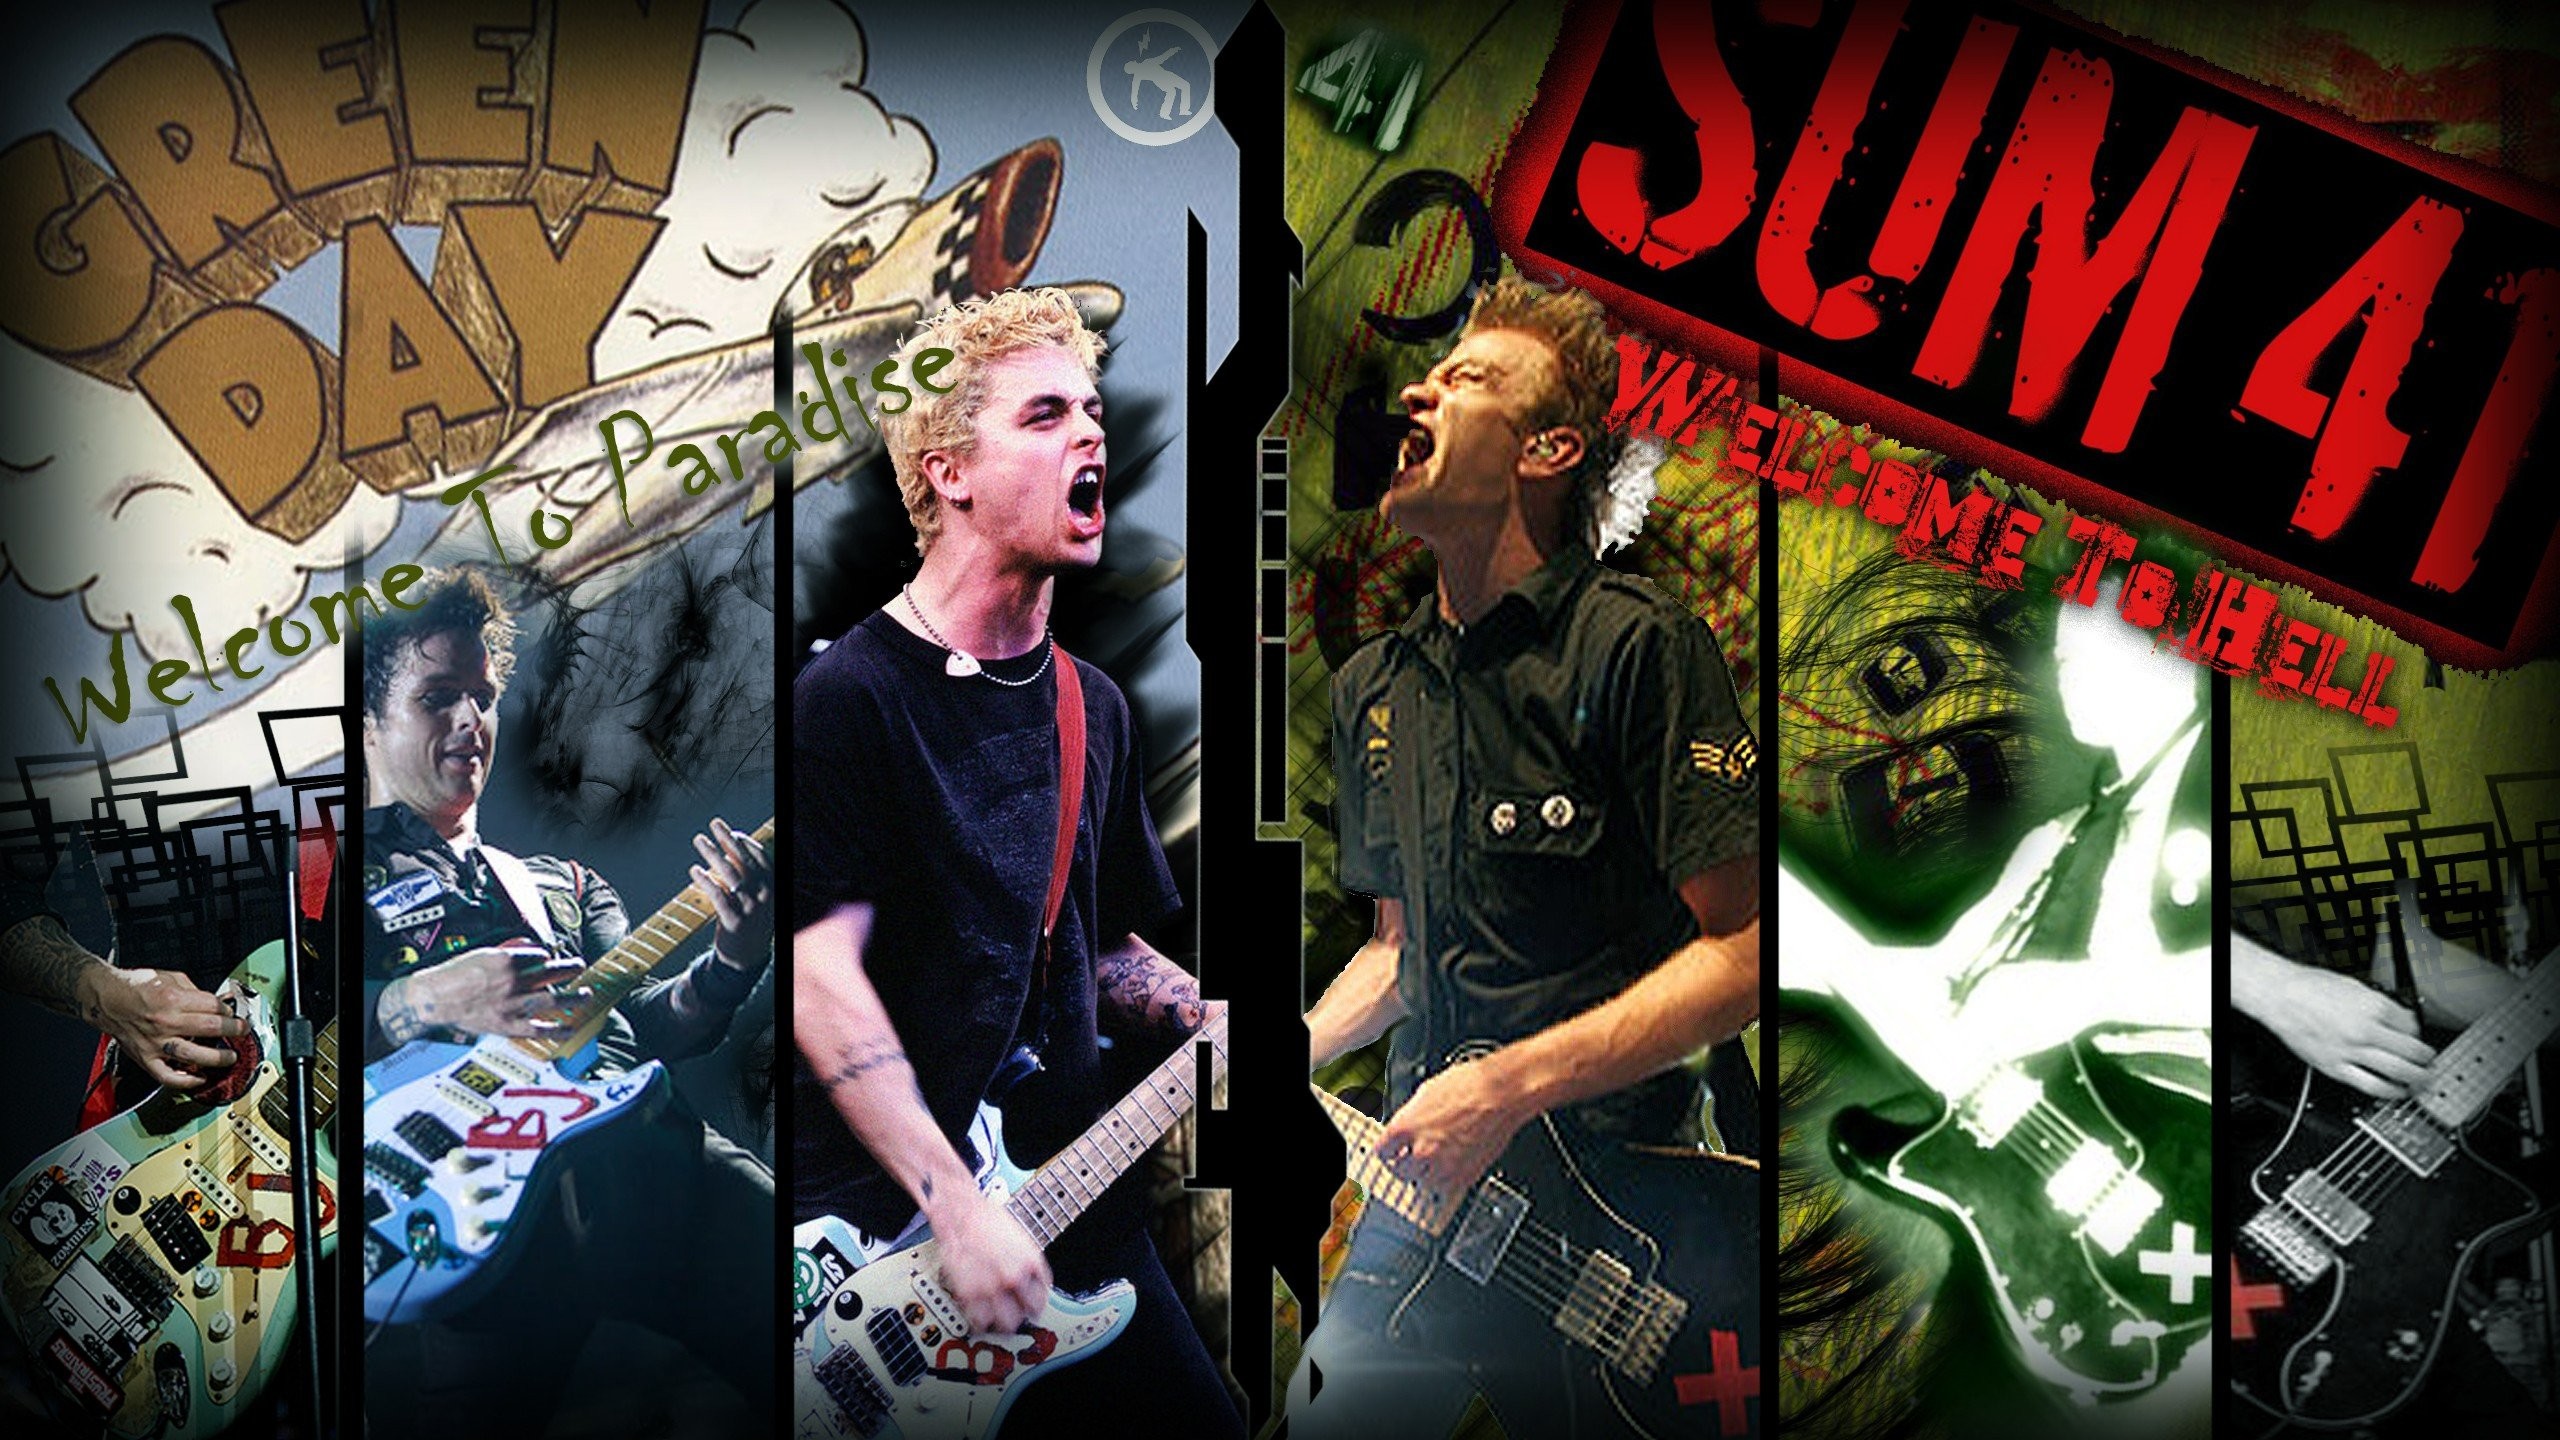 2560x1440 Free Download Green Day Image.